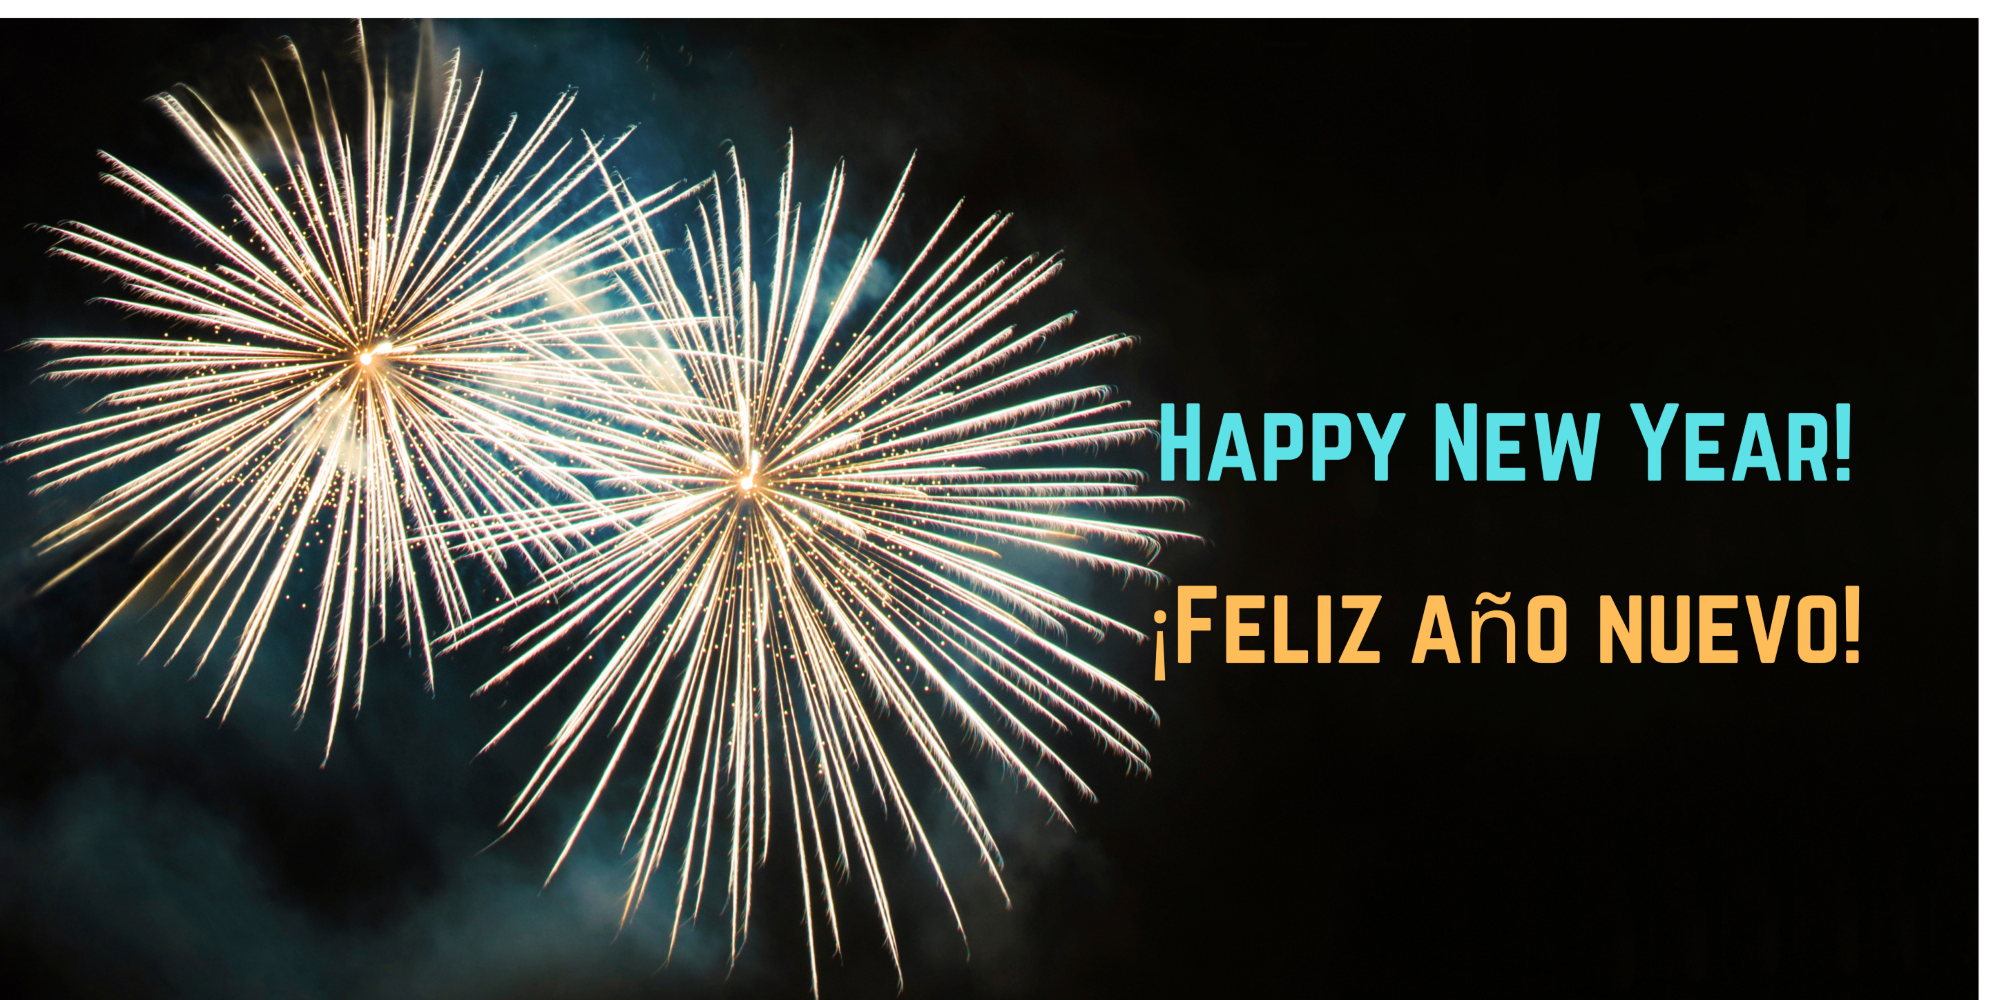 Black background with fireworks and text "Happy New Year!" and "¡Feliz Año Nuevo!"